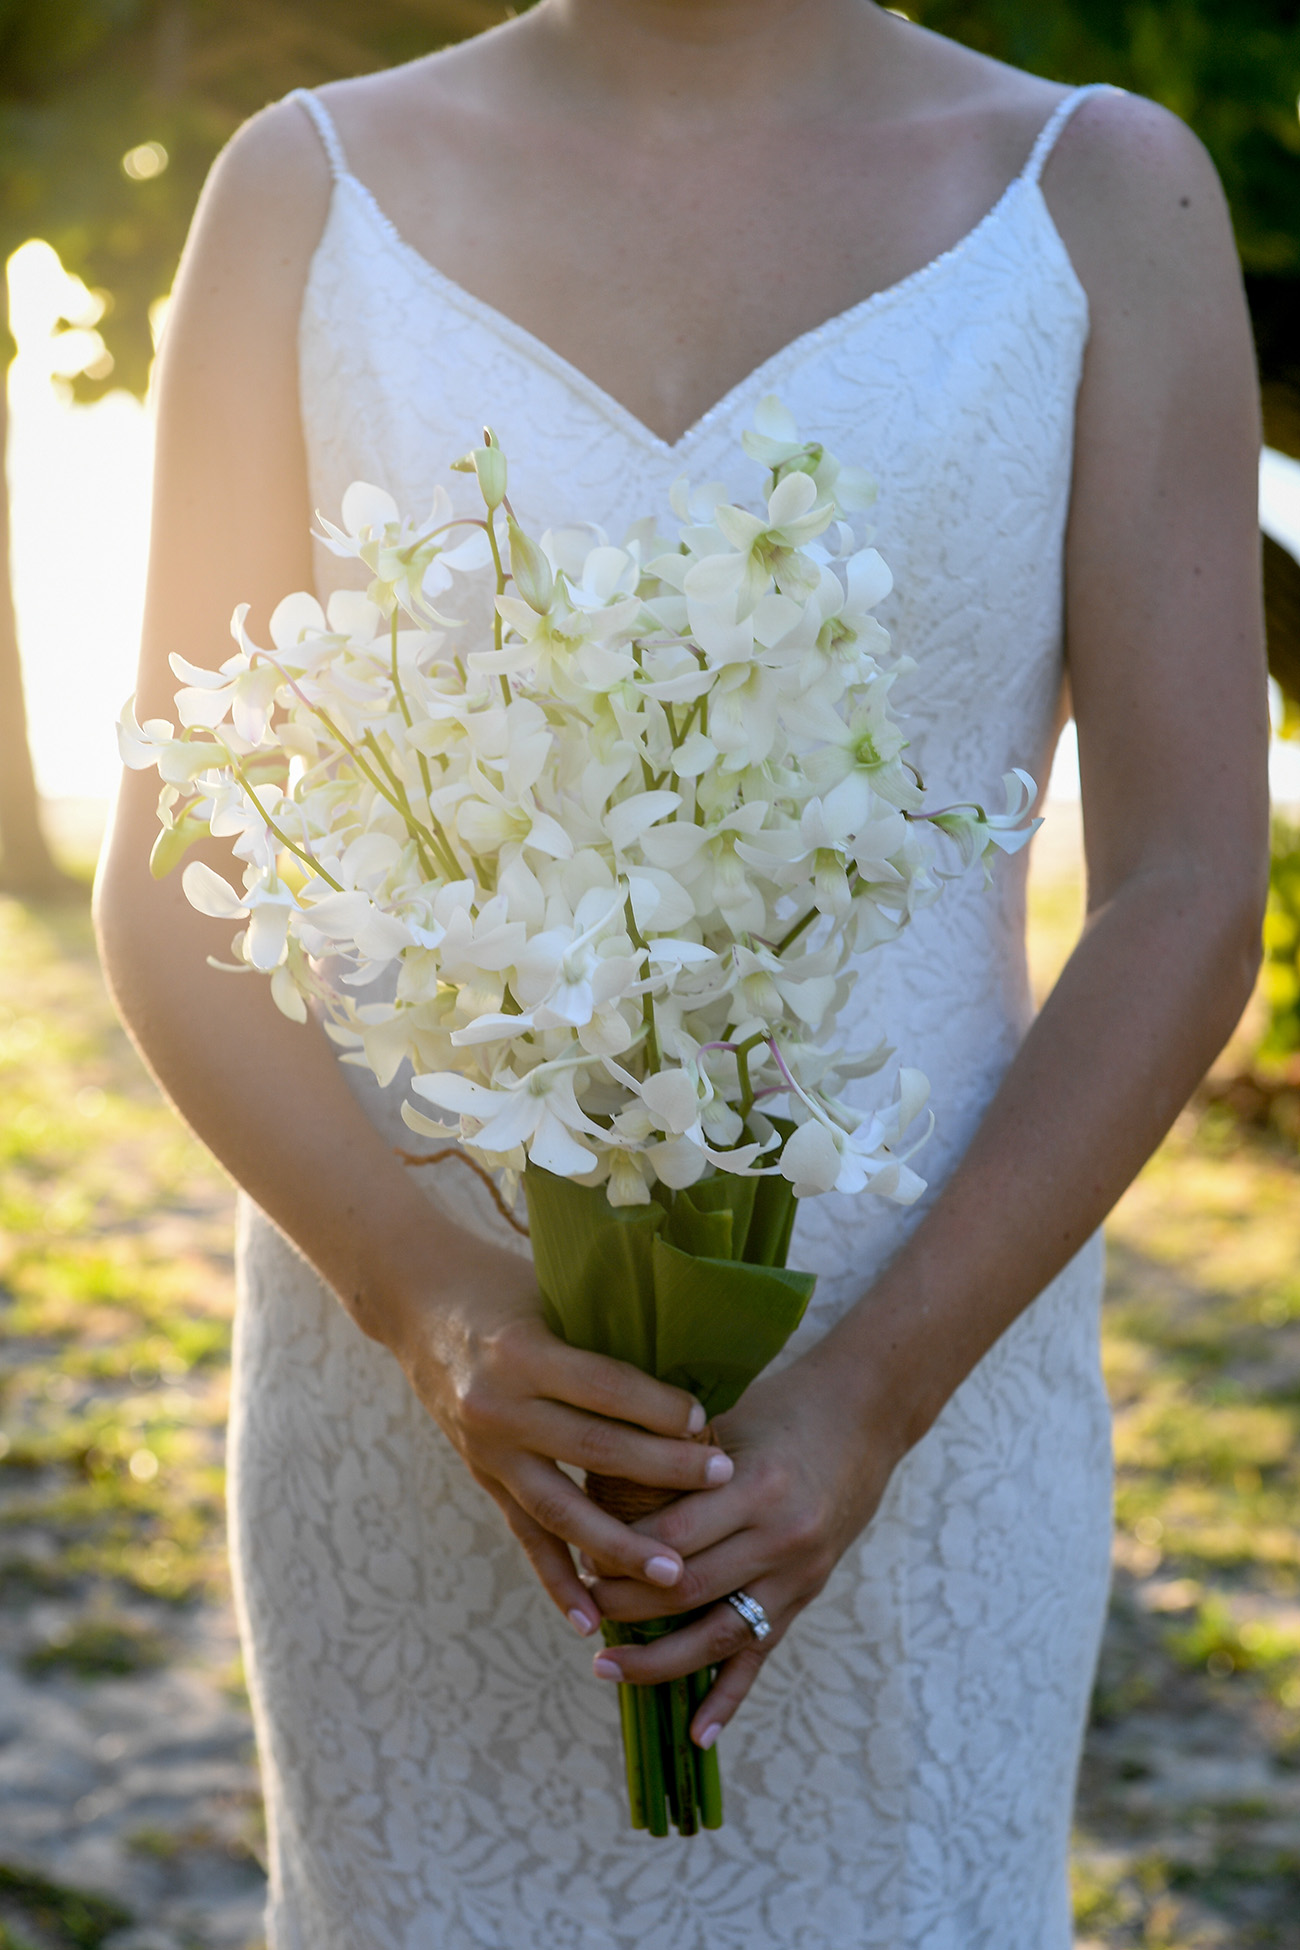 The bride poses with her tropical white flower bouquet